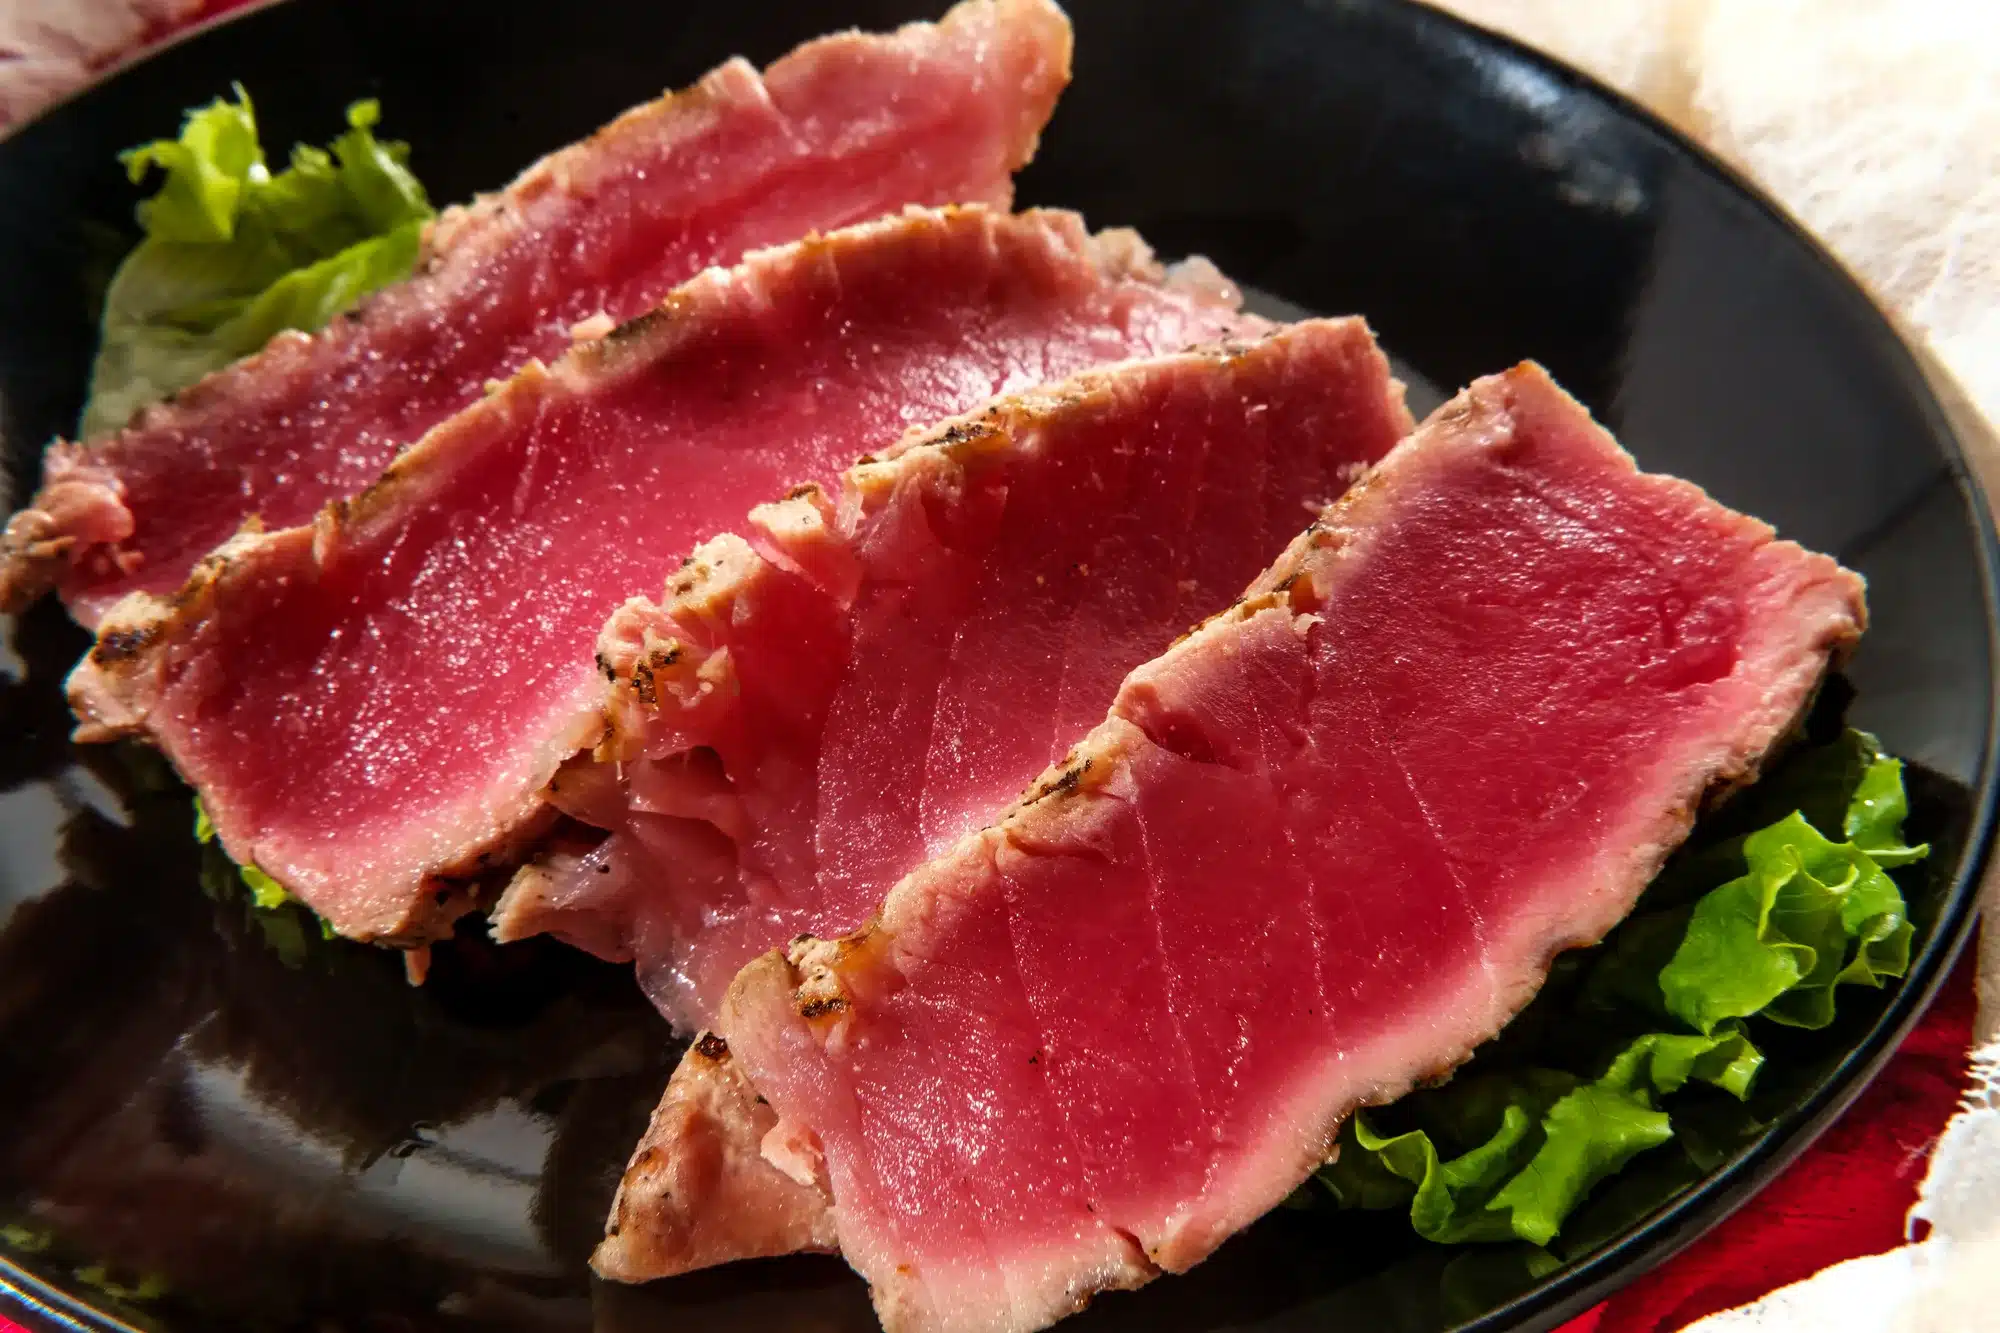 Seared ahi tuna with grill marks sliced to reveal tender pink raw inside